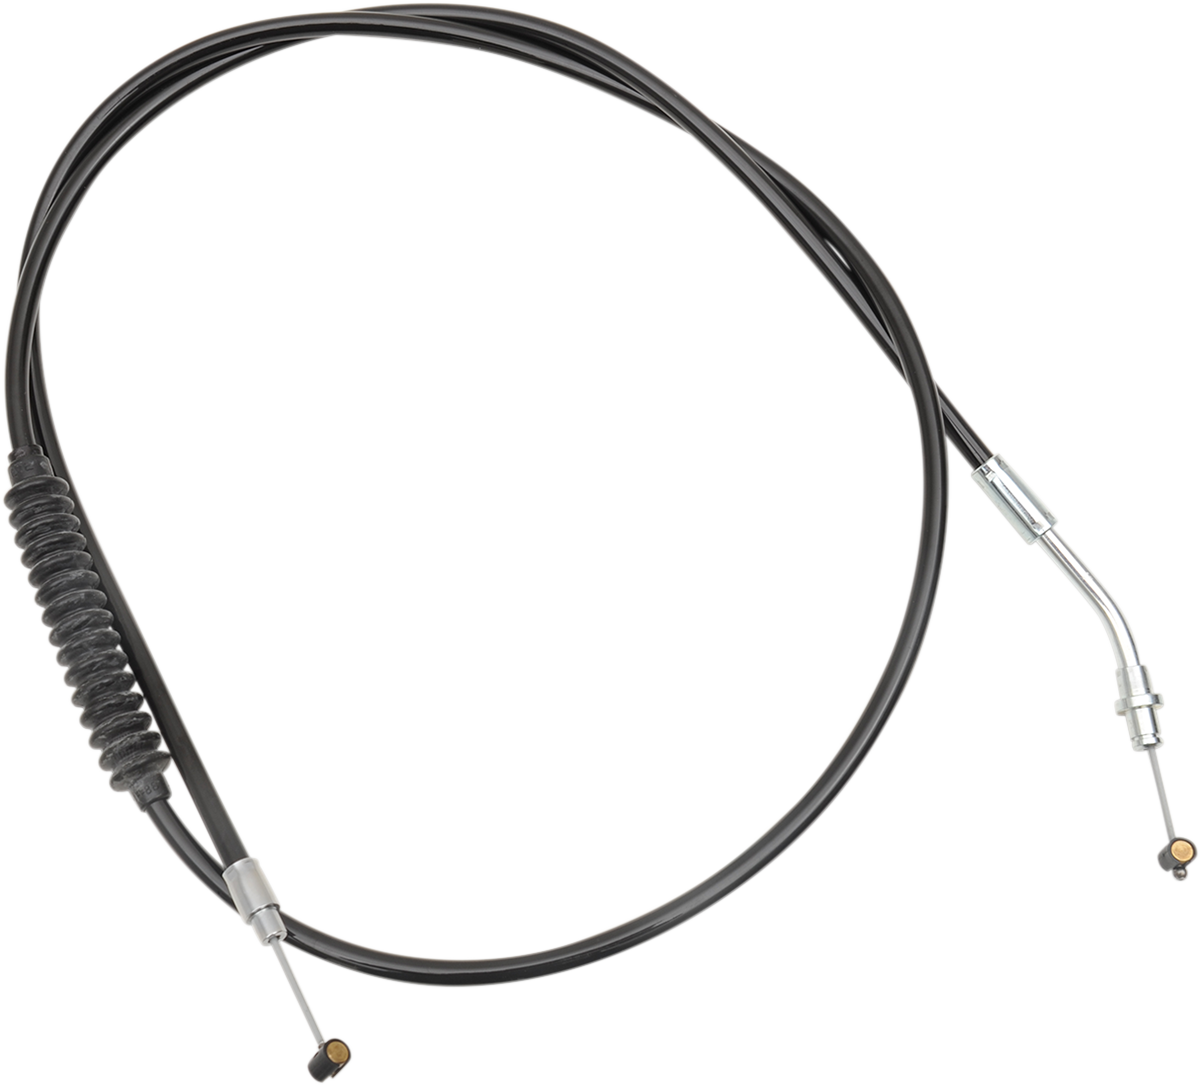 BARNETT Clutch Cable - +6" - Indian - Black 101-40-10004-06